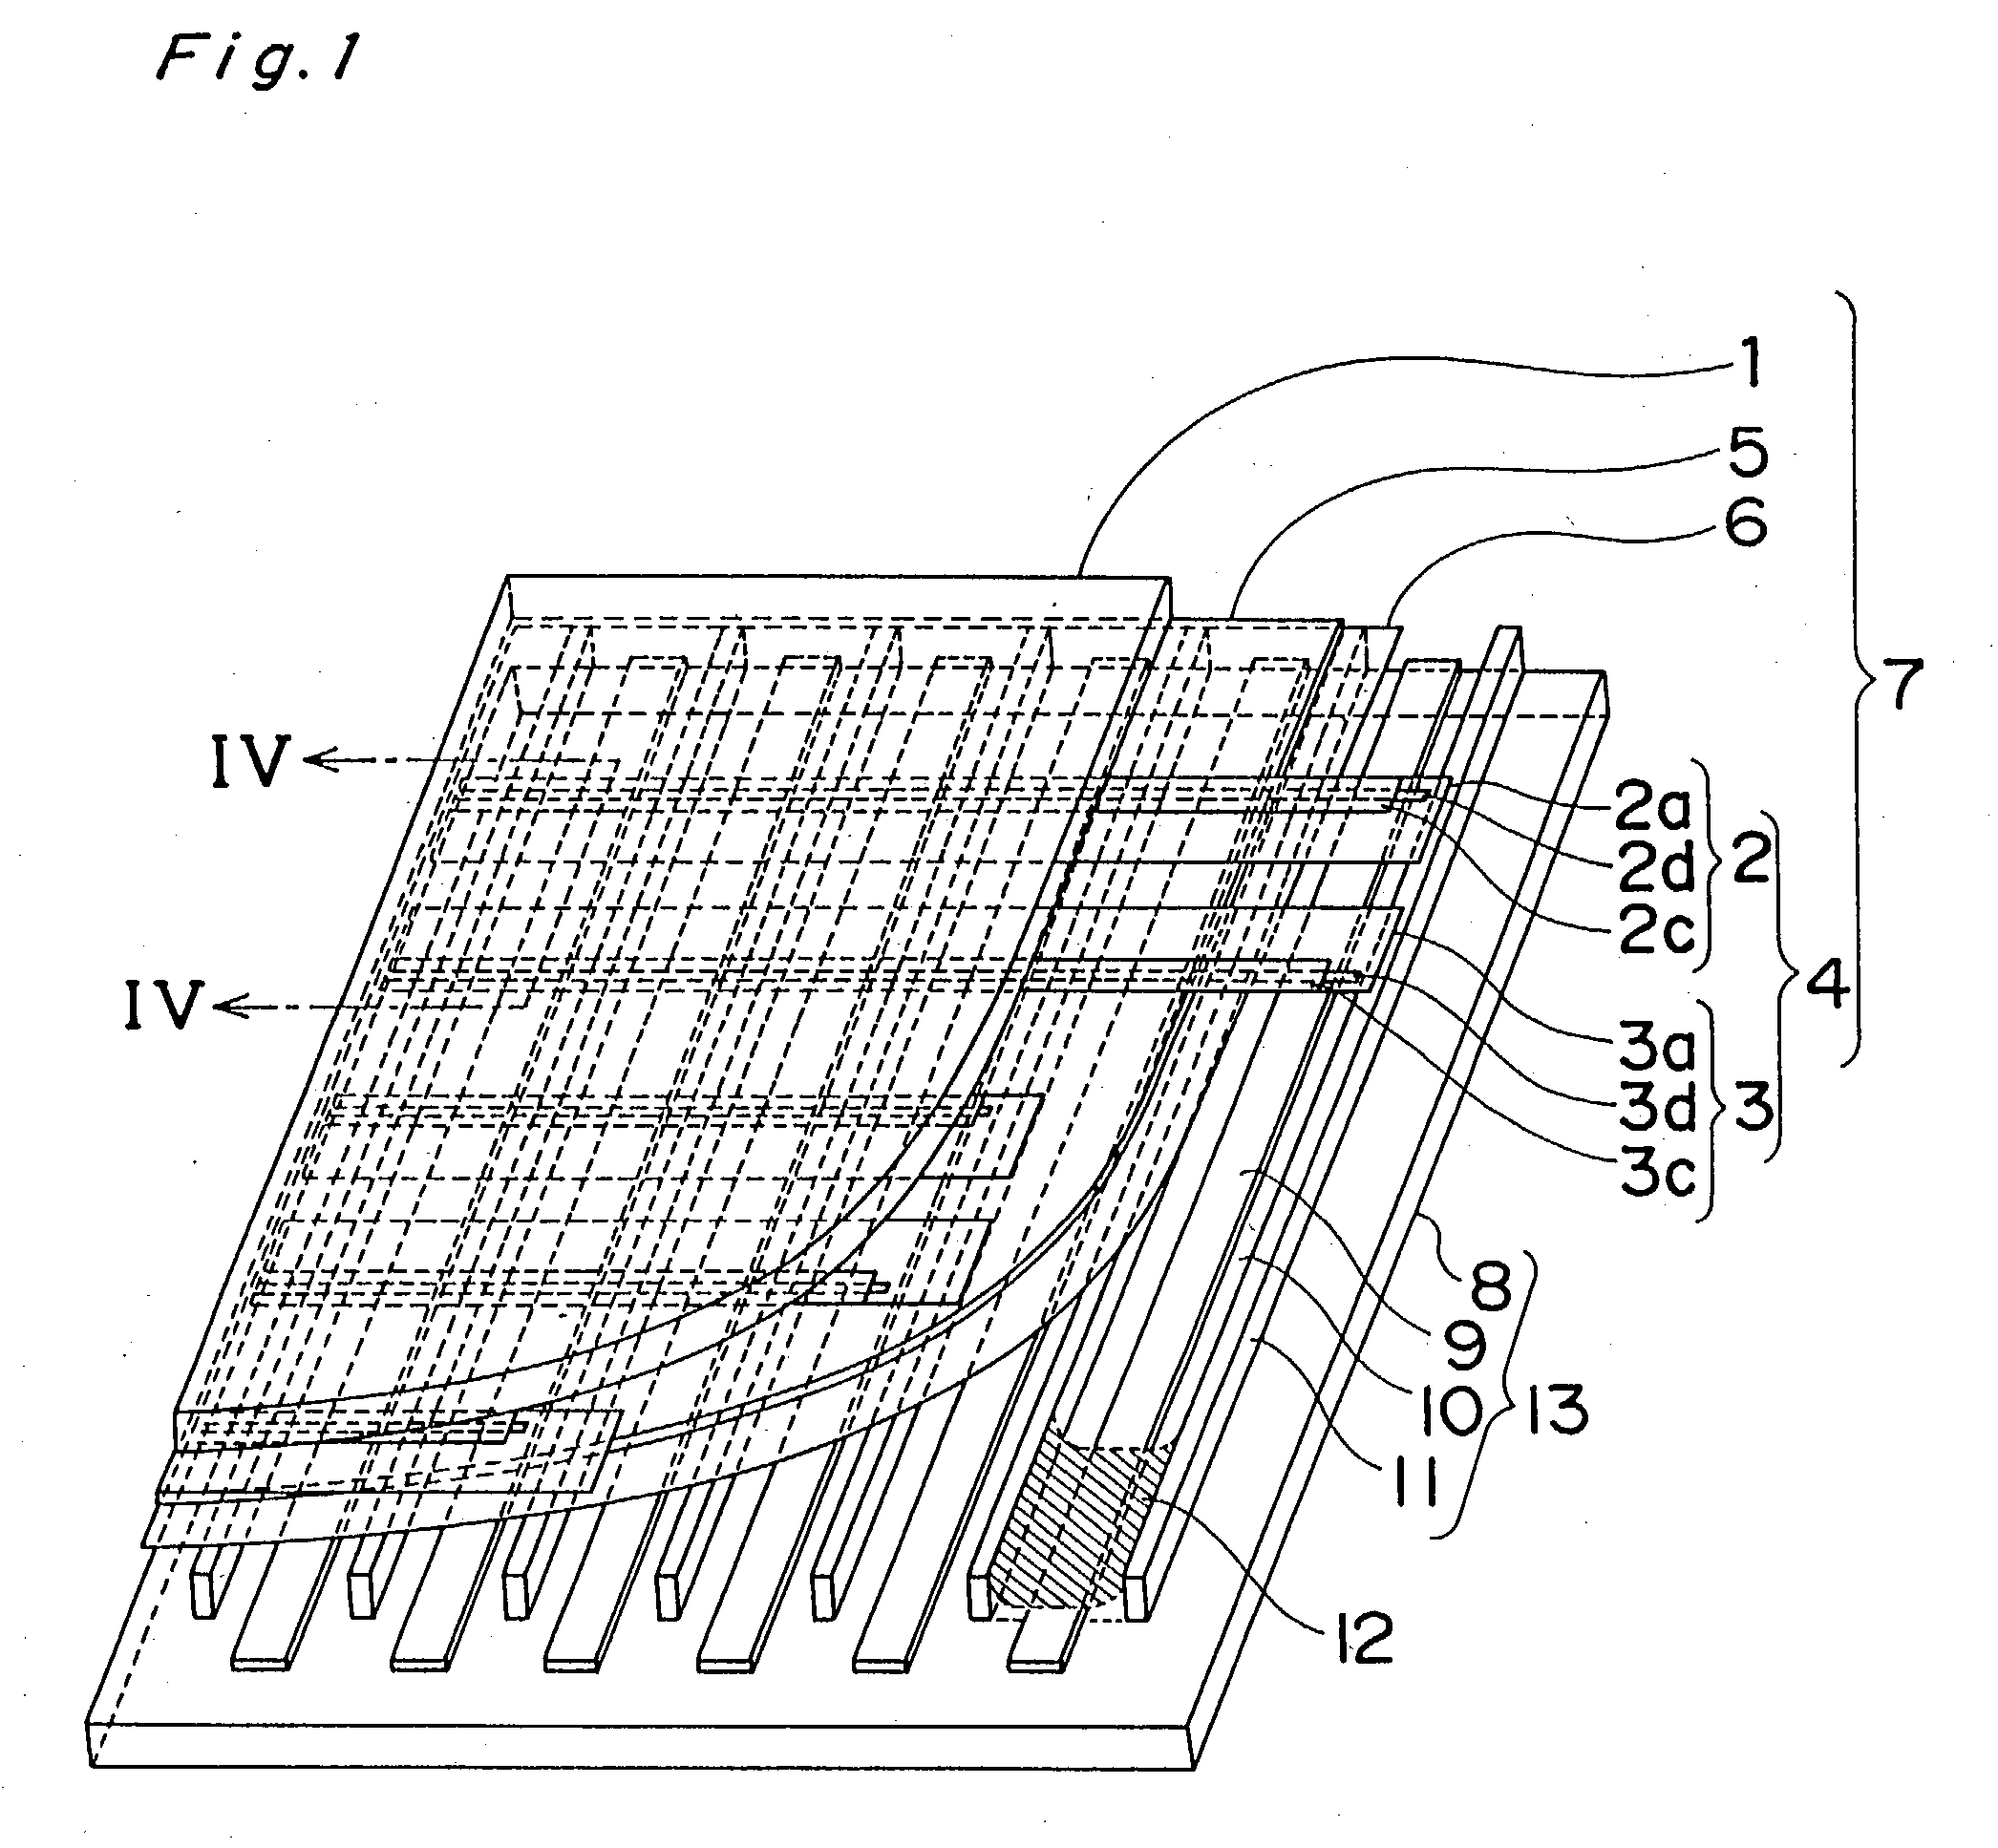 Plasma display panel that is operable to suppress the reflection of extraneous light, thereby improving the display contrast